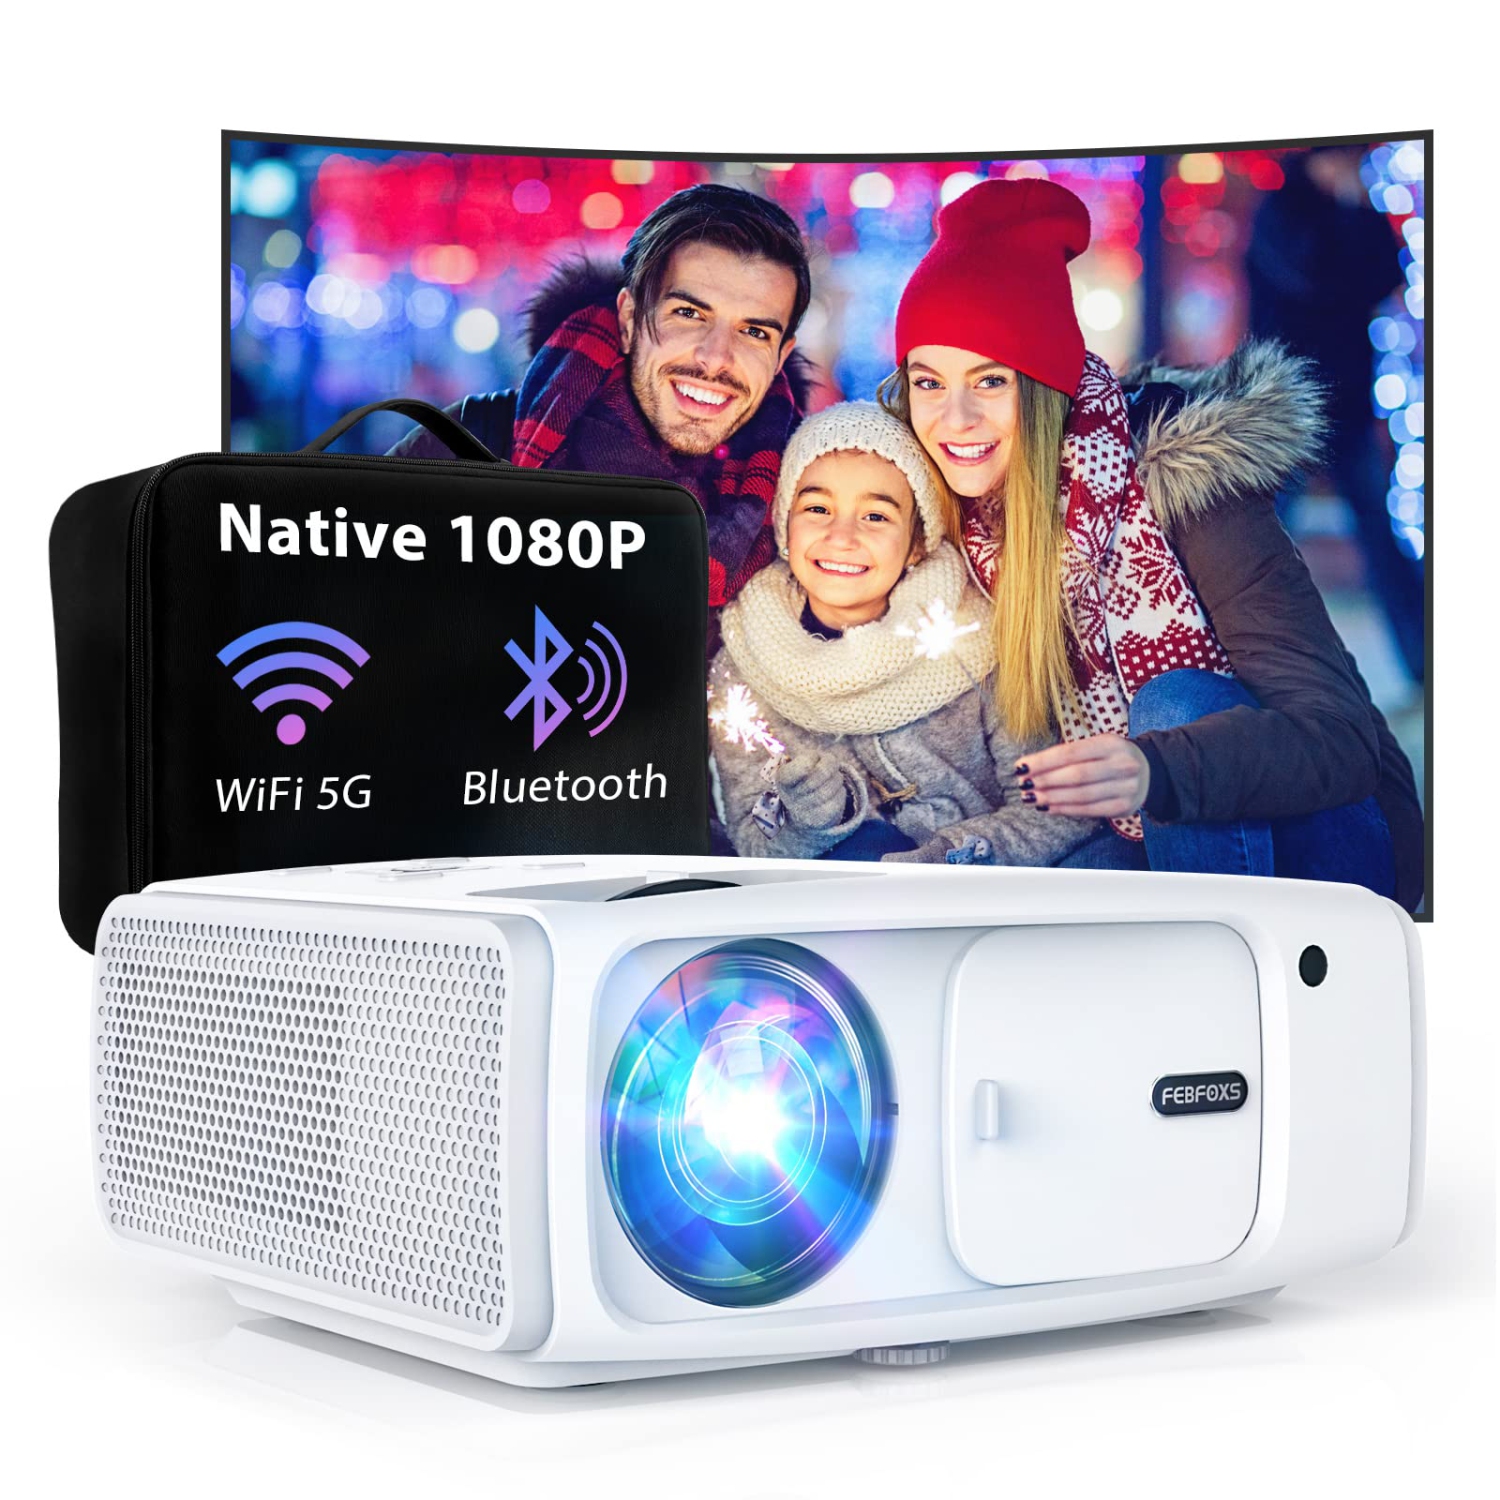 Projector with WiFi and Bluetooth, Mini Portable Projector with Bag, Native 1080P Projector for indoor or outdoor movie ues, Compatible with Phone/Laptop/TV Stick/PS5